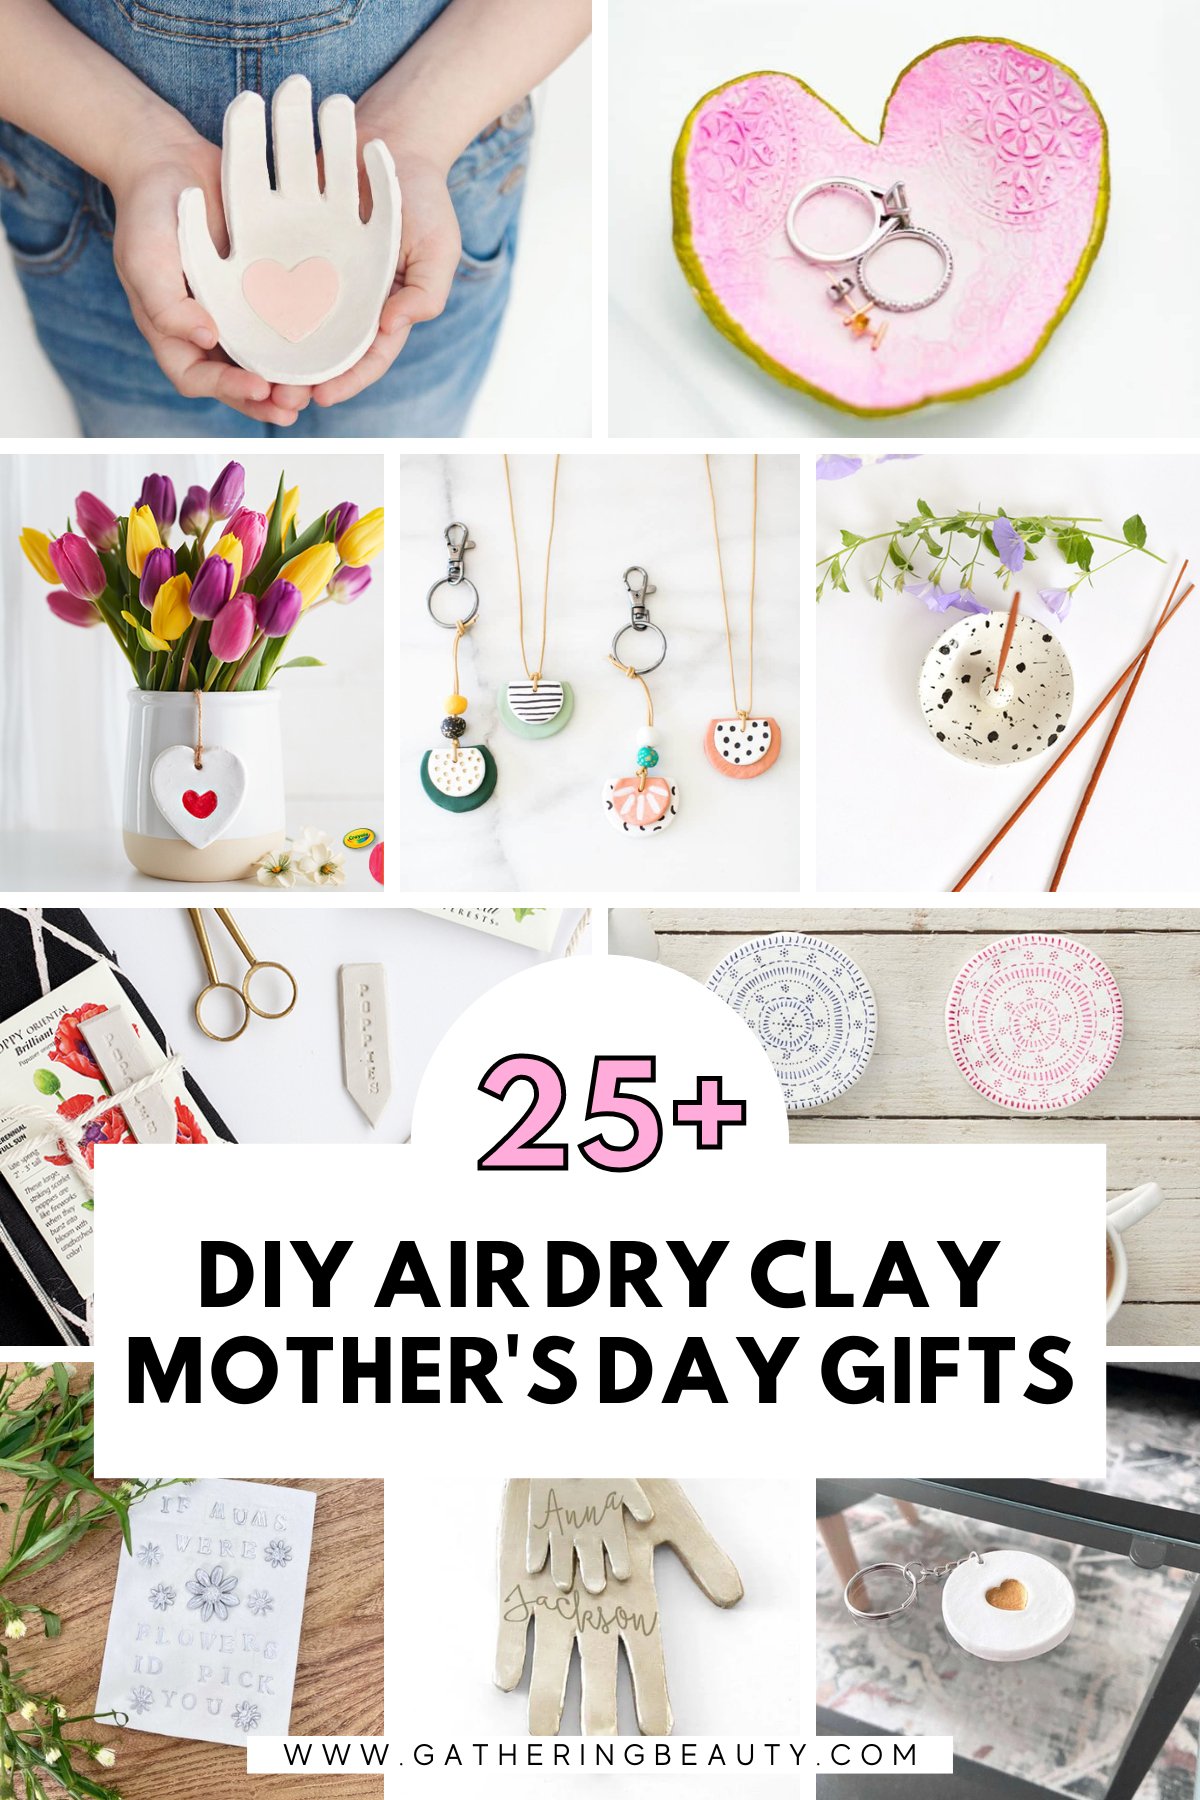 Adorable Clay Craft  Clay projects for kids, Clay crafts, Clay crafts for  kids